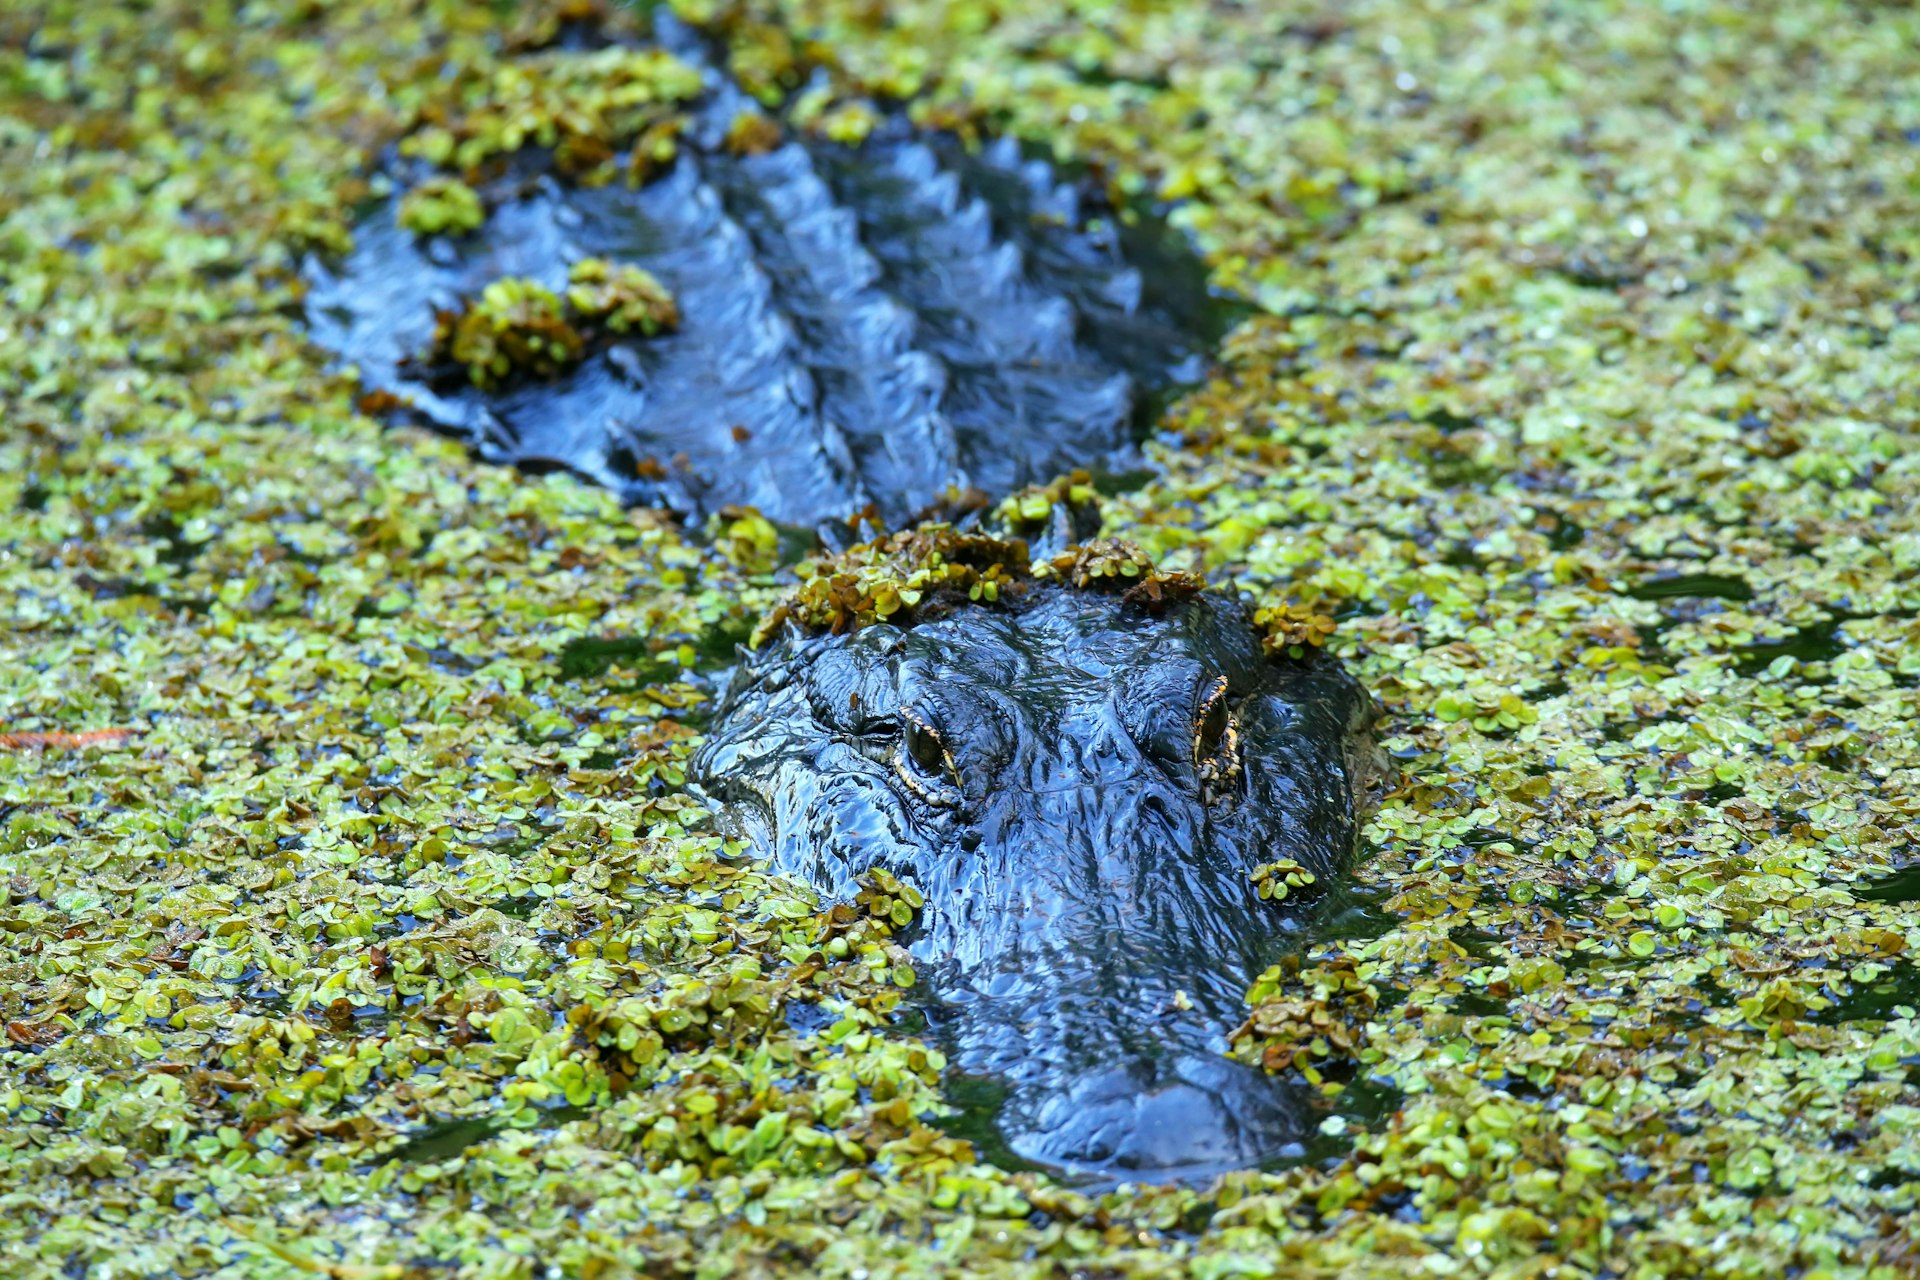 A gator near the surface of the water surrounded by greenery